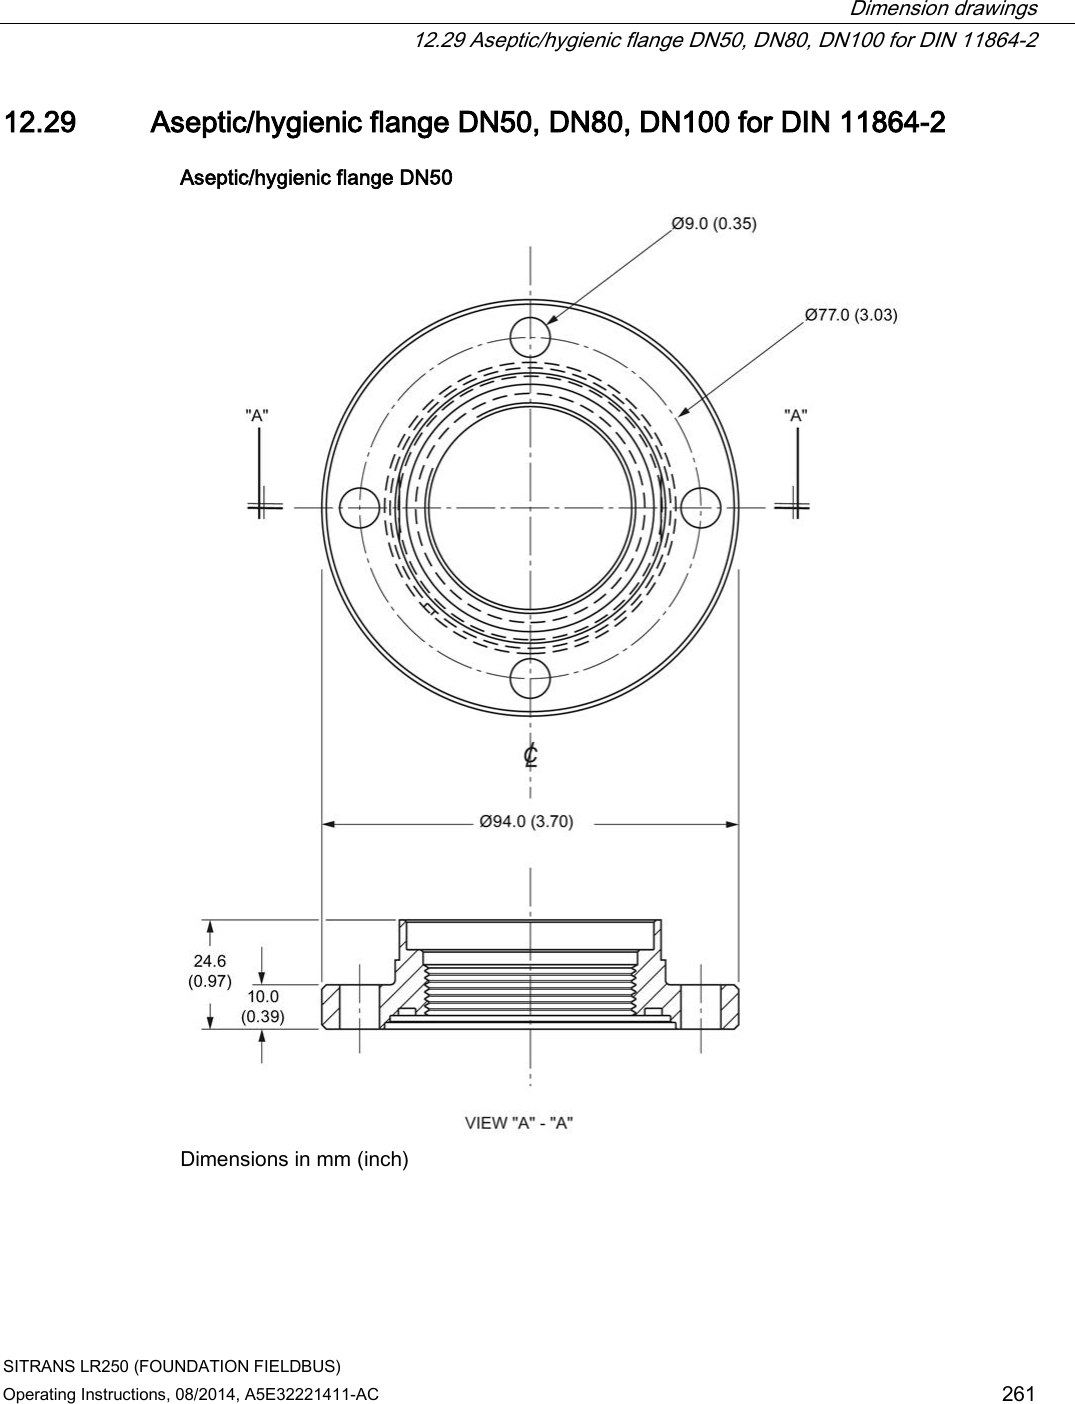  Dimension drawings  12.29 Aseptic/hygienic flange DN50, DN80, DN100 for DIN 11864-2 SITRANS LR250 (FOUNDATION FIELDBUS) Operating Instructions, 08/2014, A5E32221411-AC 261 12.29 Aseptic/hygienic flange DN50, DN80, DN100 for DIN 11864-2 Aseptic/hygienic flange DN50  Dimensions in mm (inch) 